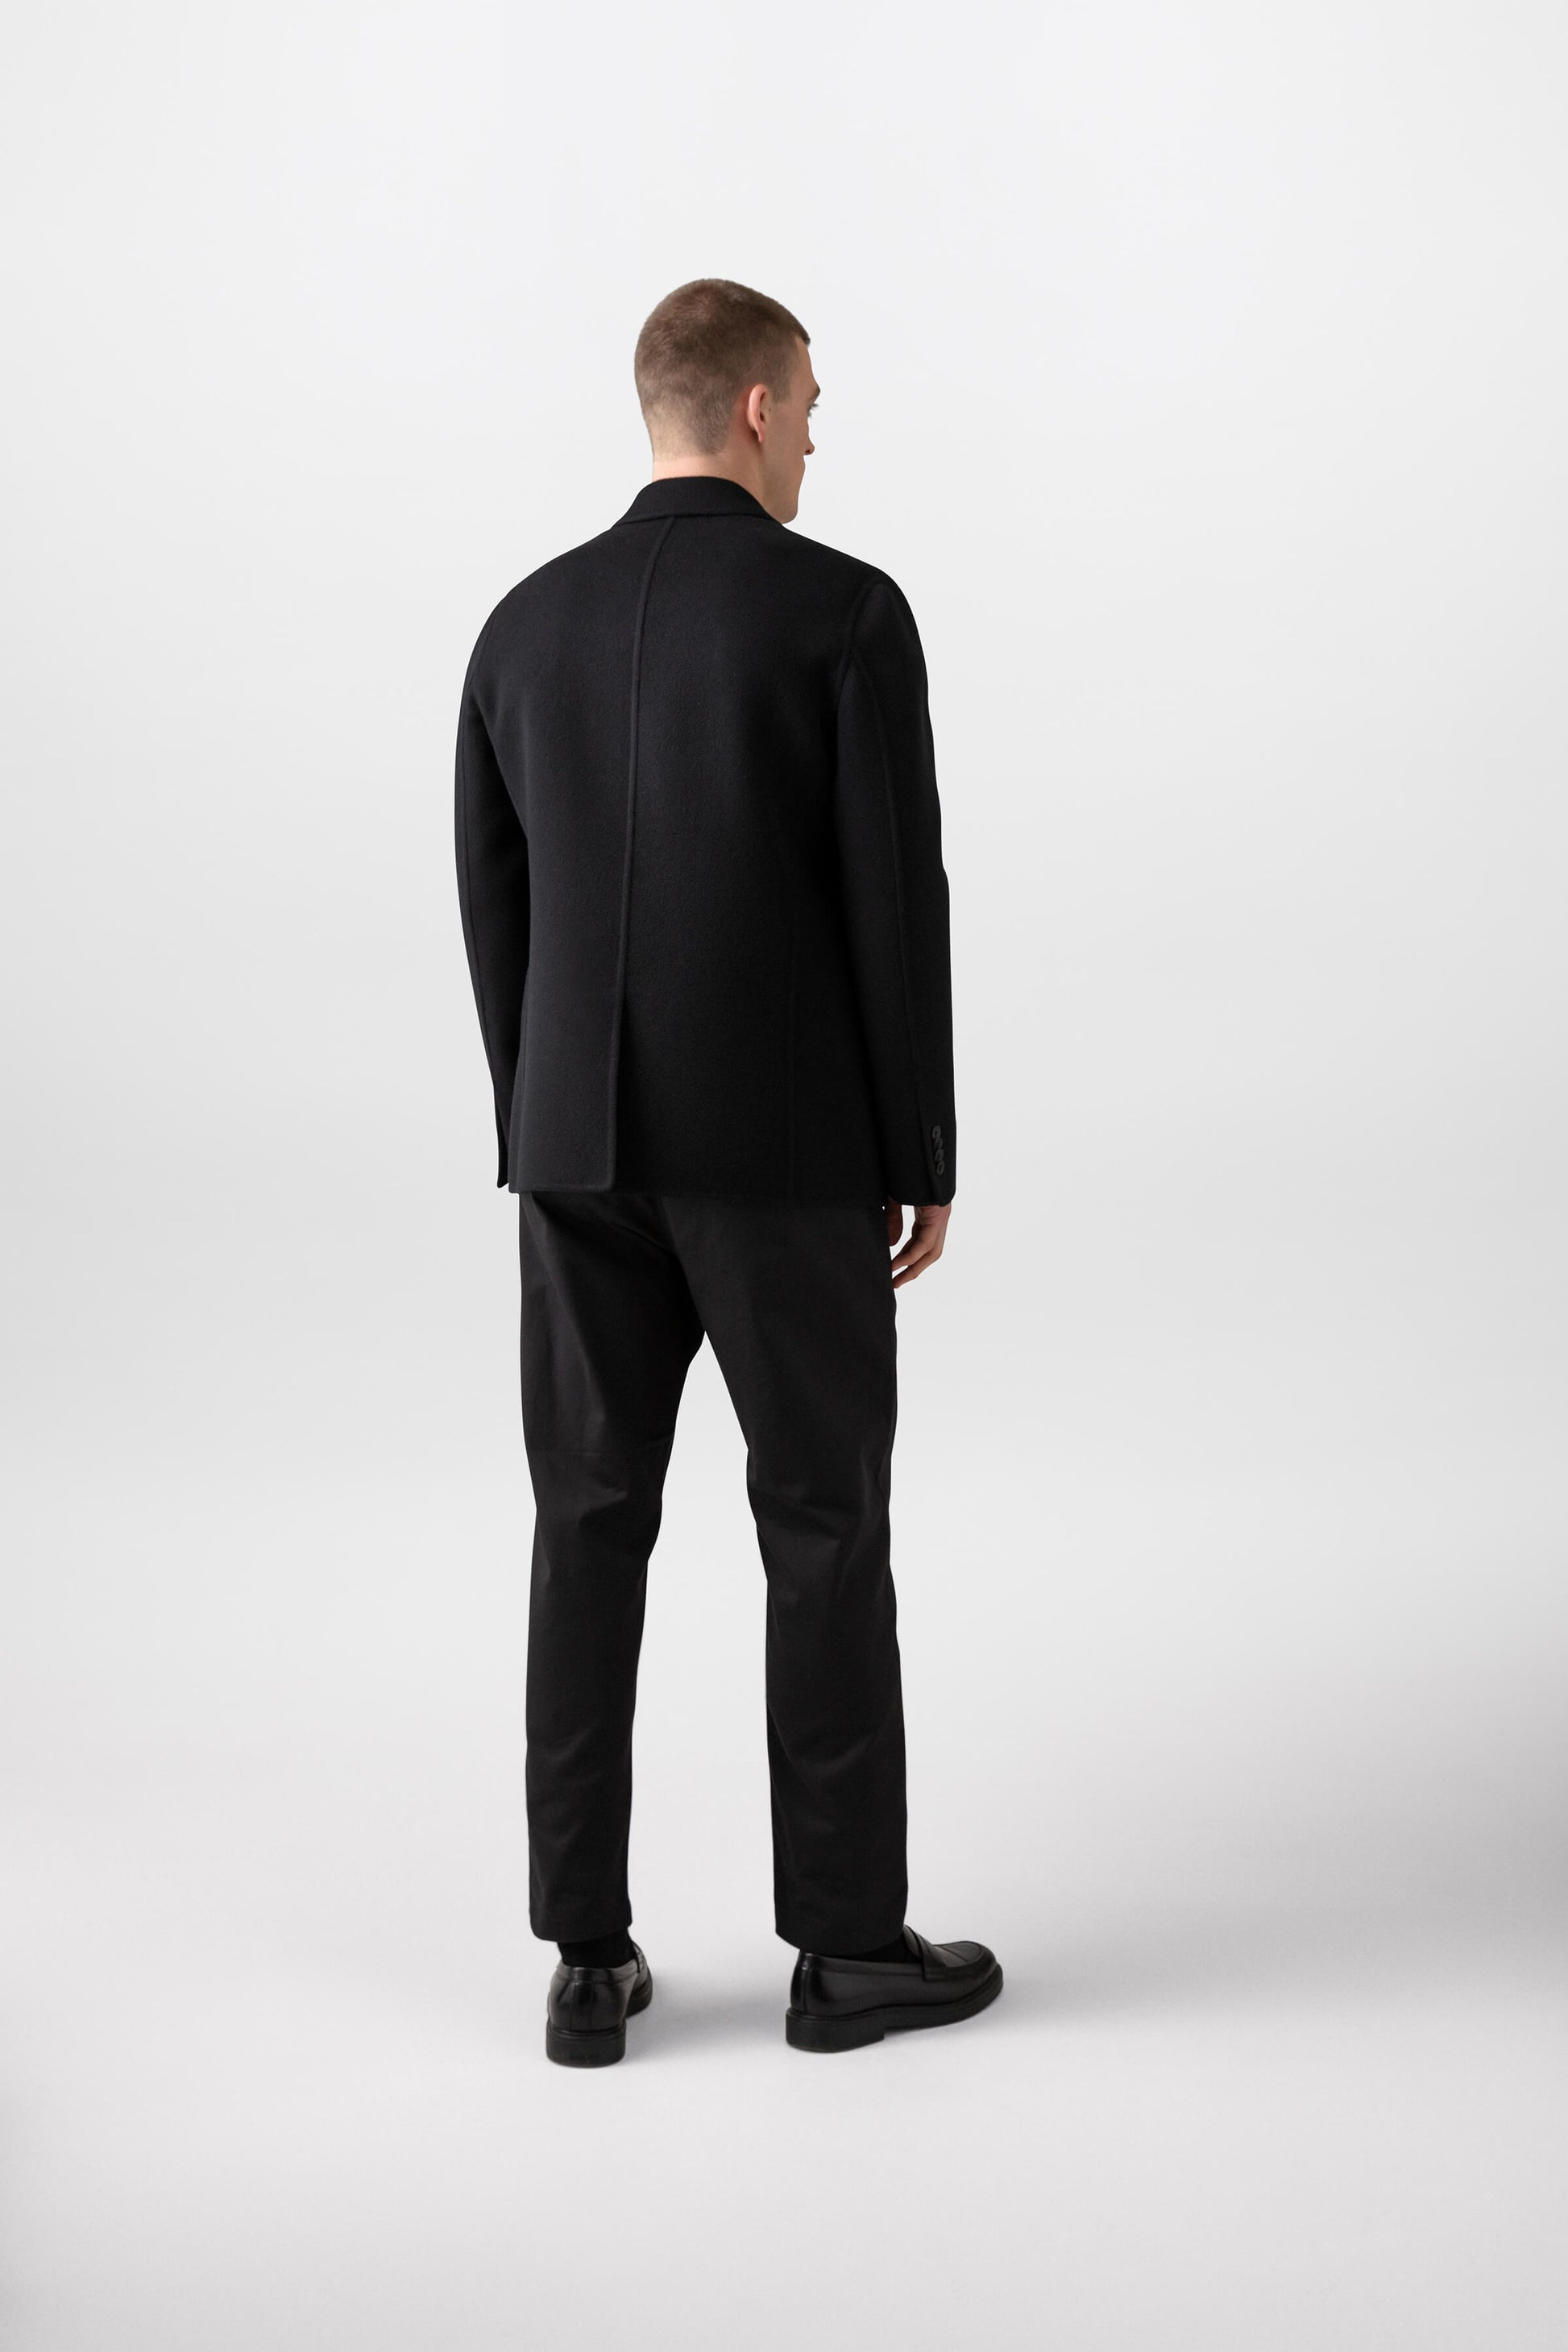 Johnstons of Elgin’s Men's Double Face Cashmere Jacket in Black on model wearing black trousers and red jumper on a white background TA000517RU6432